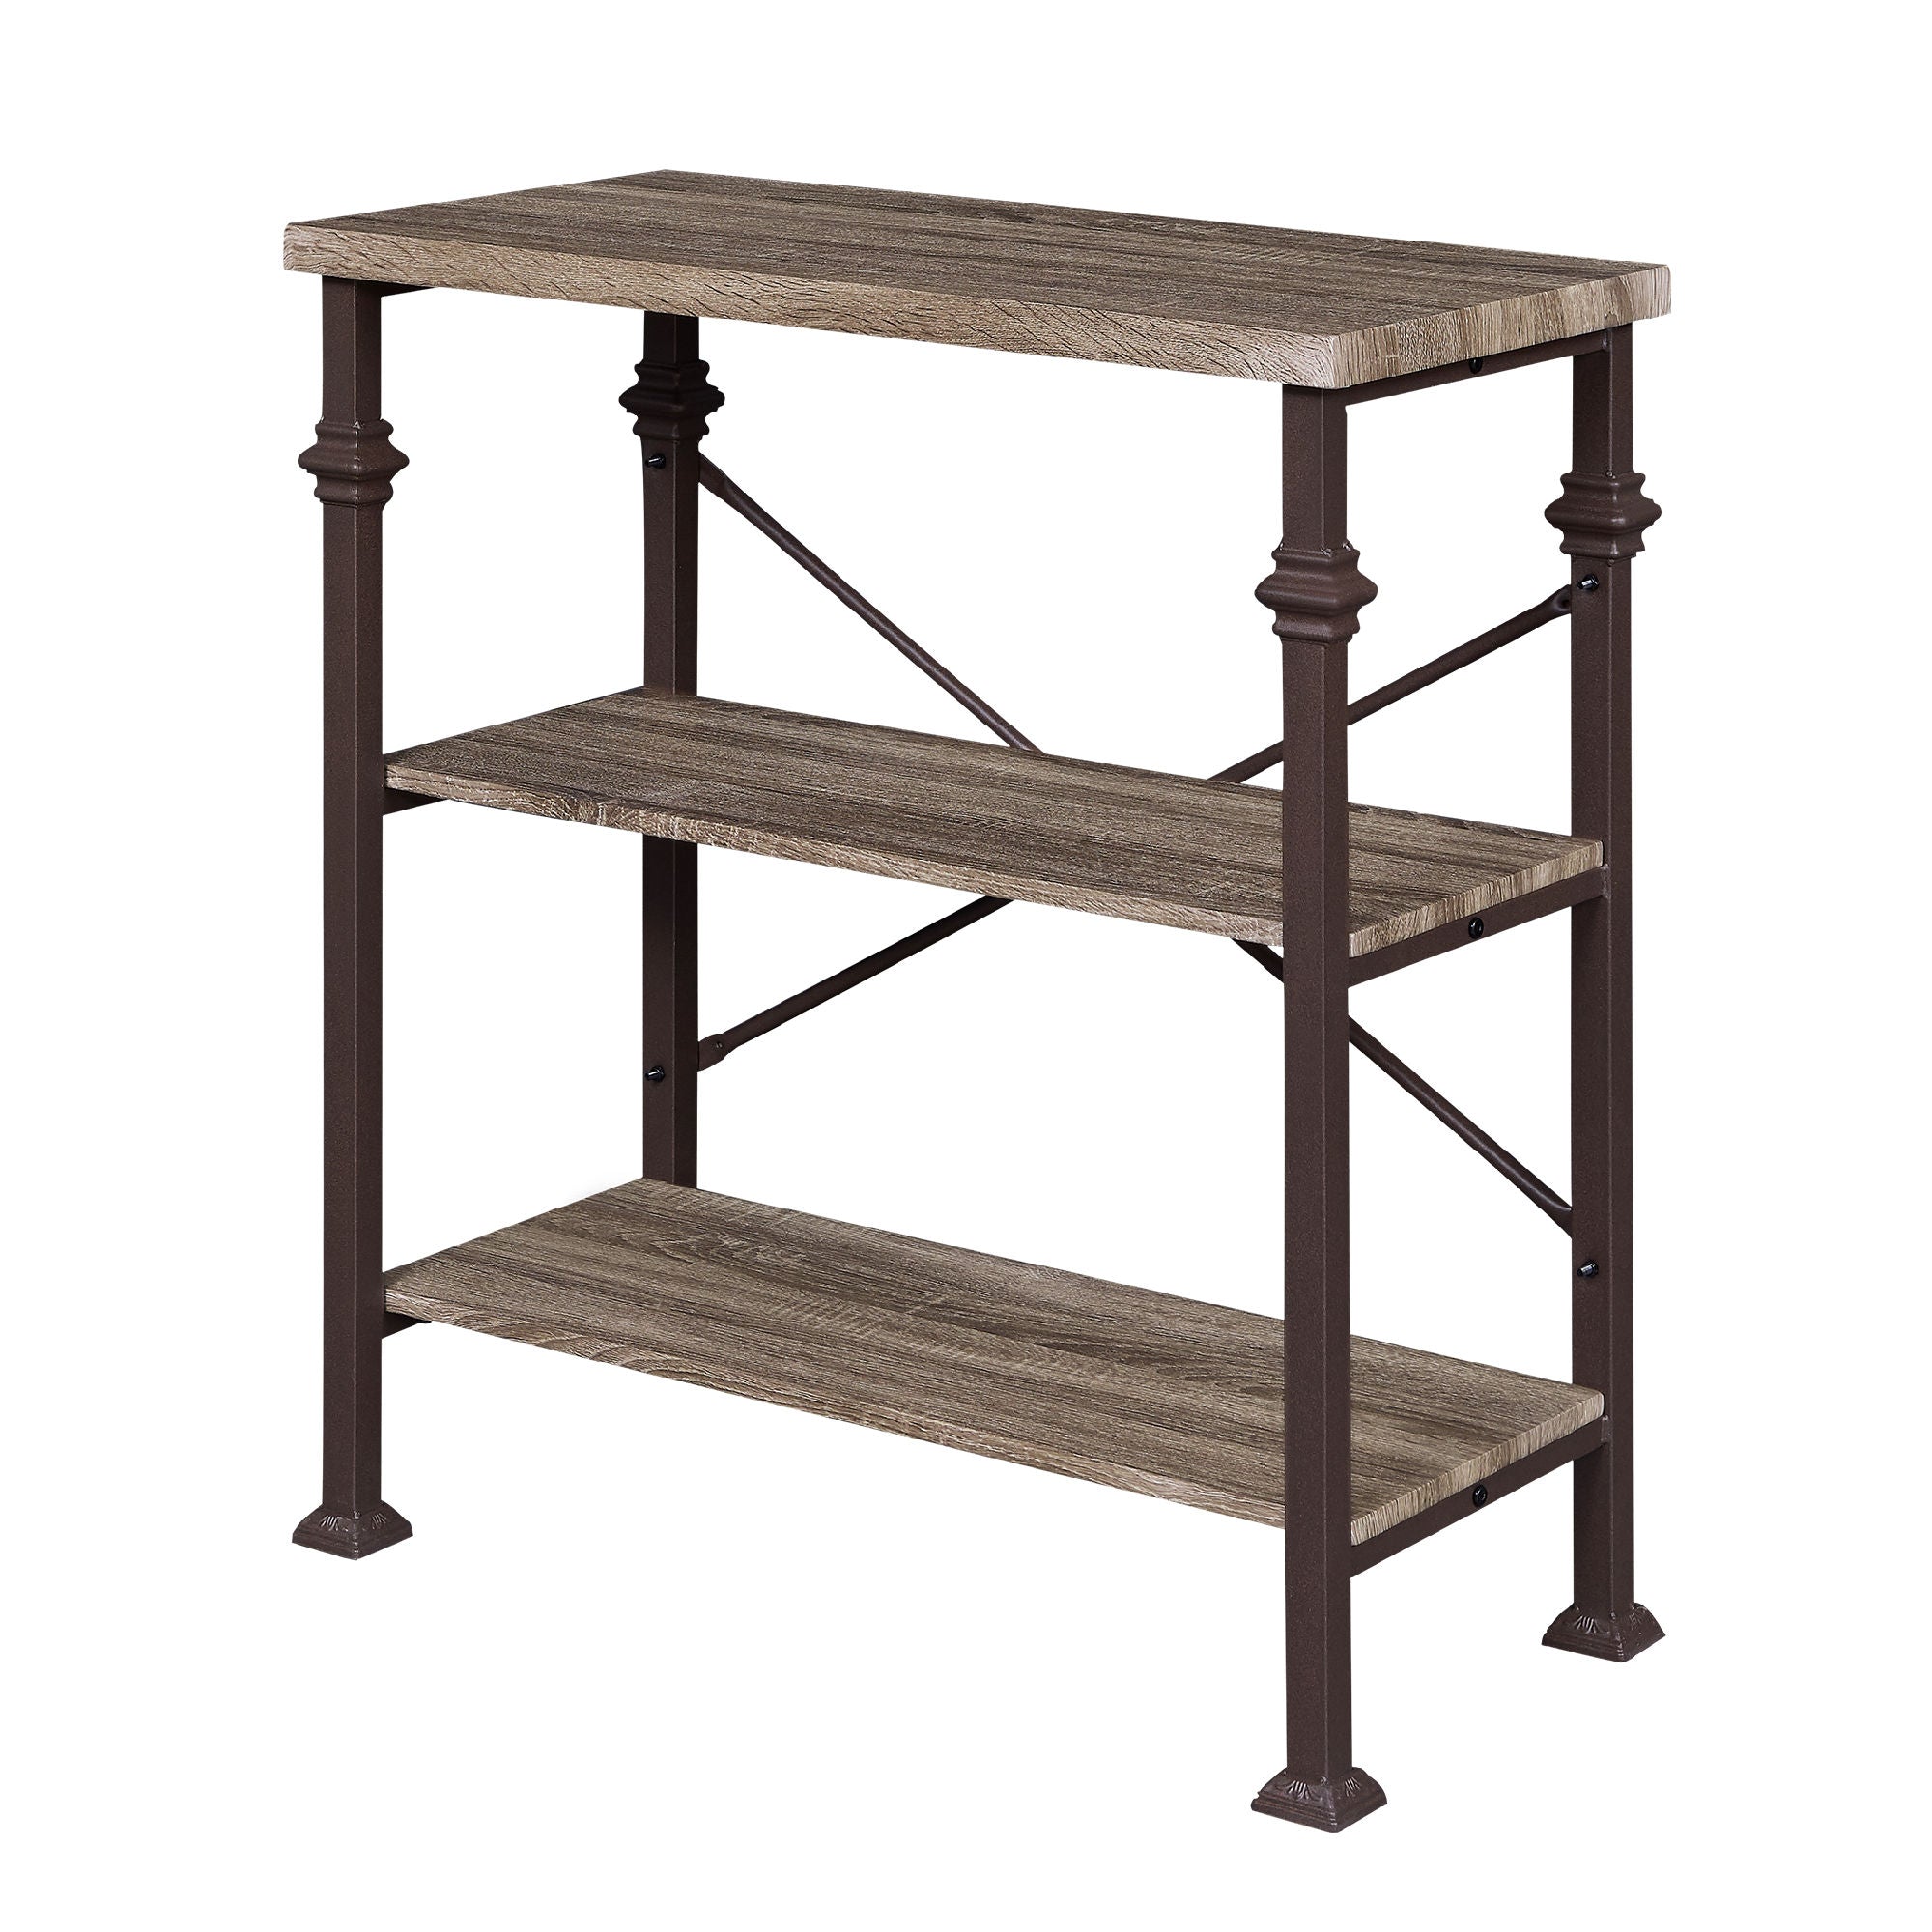 Free shipping 3-Tier Bookshelf, Rustic Industrial Style Bookcase Furniture, Free Standing Storage Shelves for Living Room Bedroom and Kitchen, Grey Oak